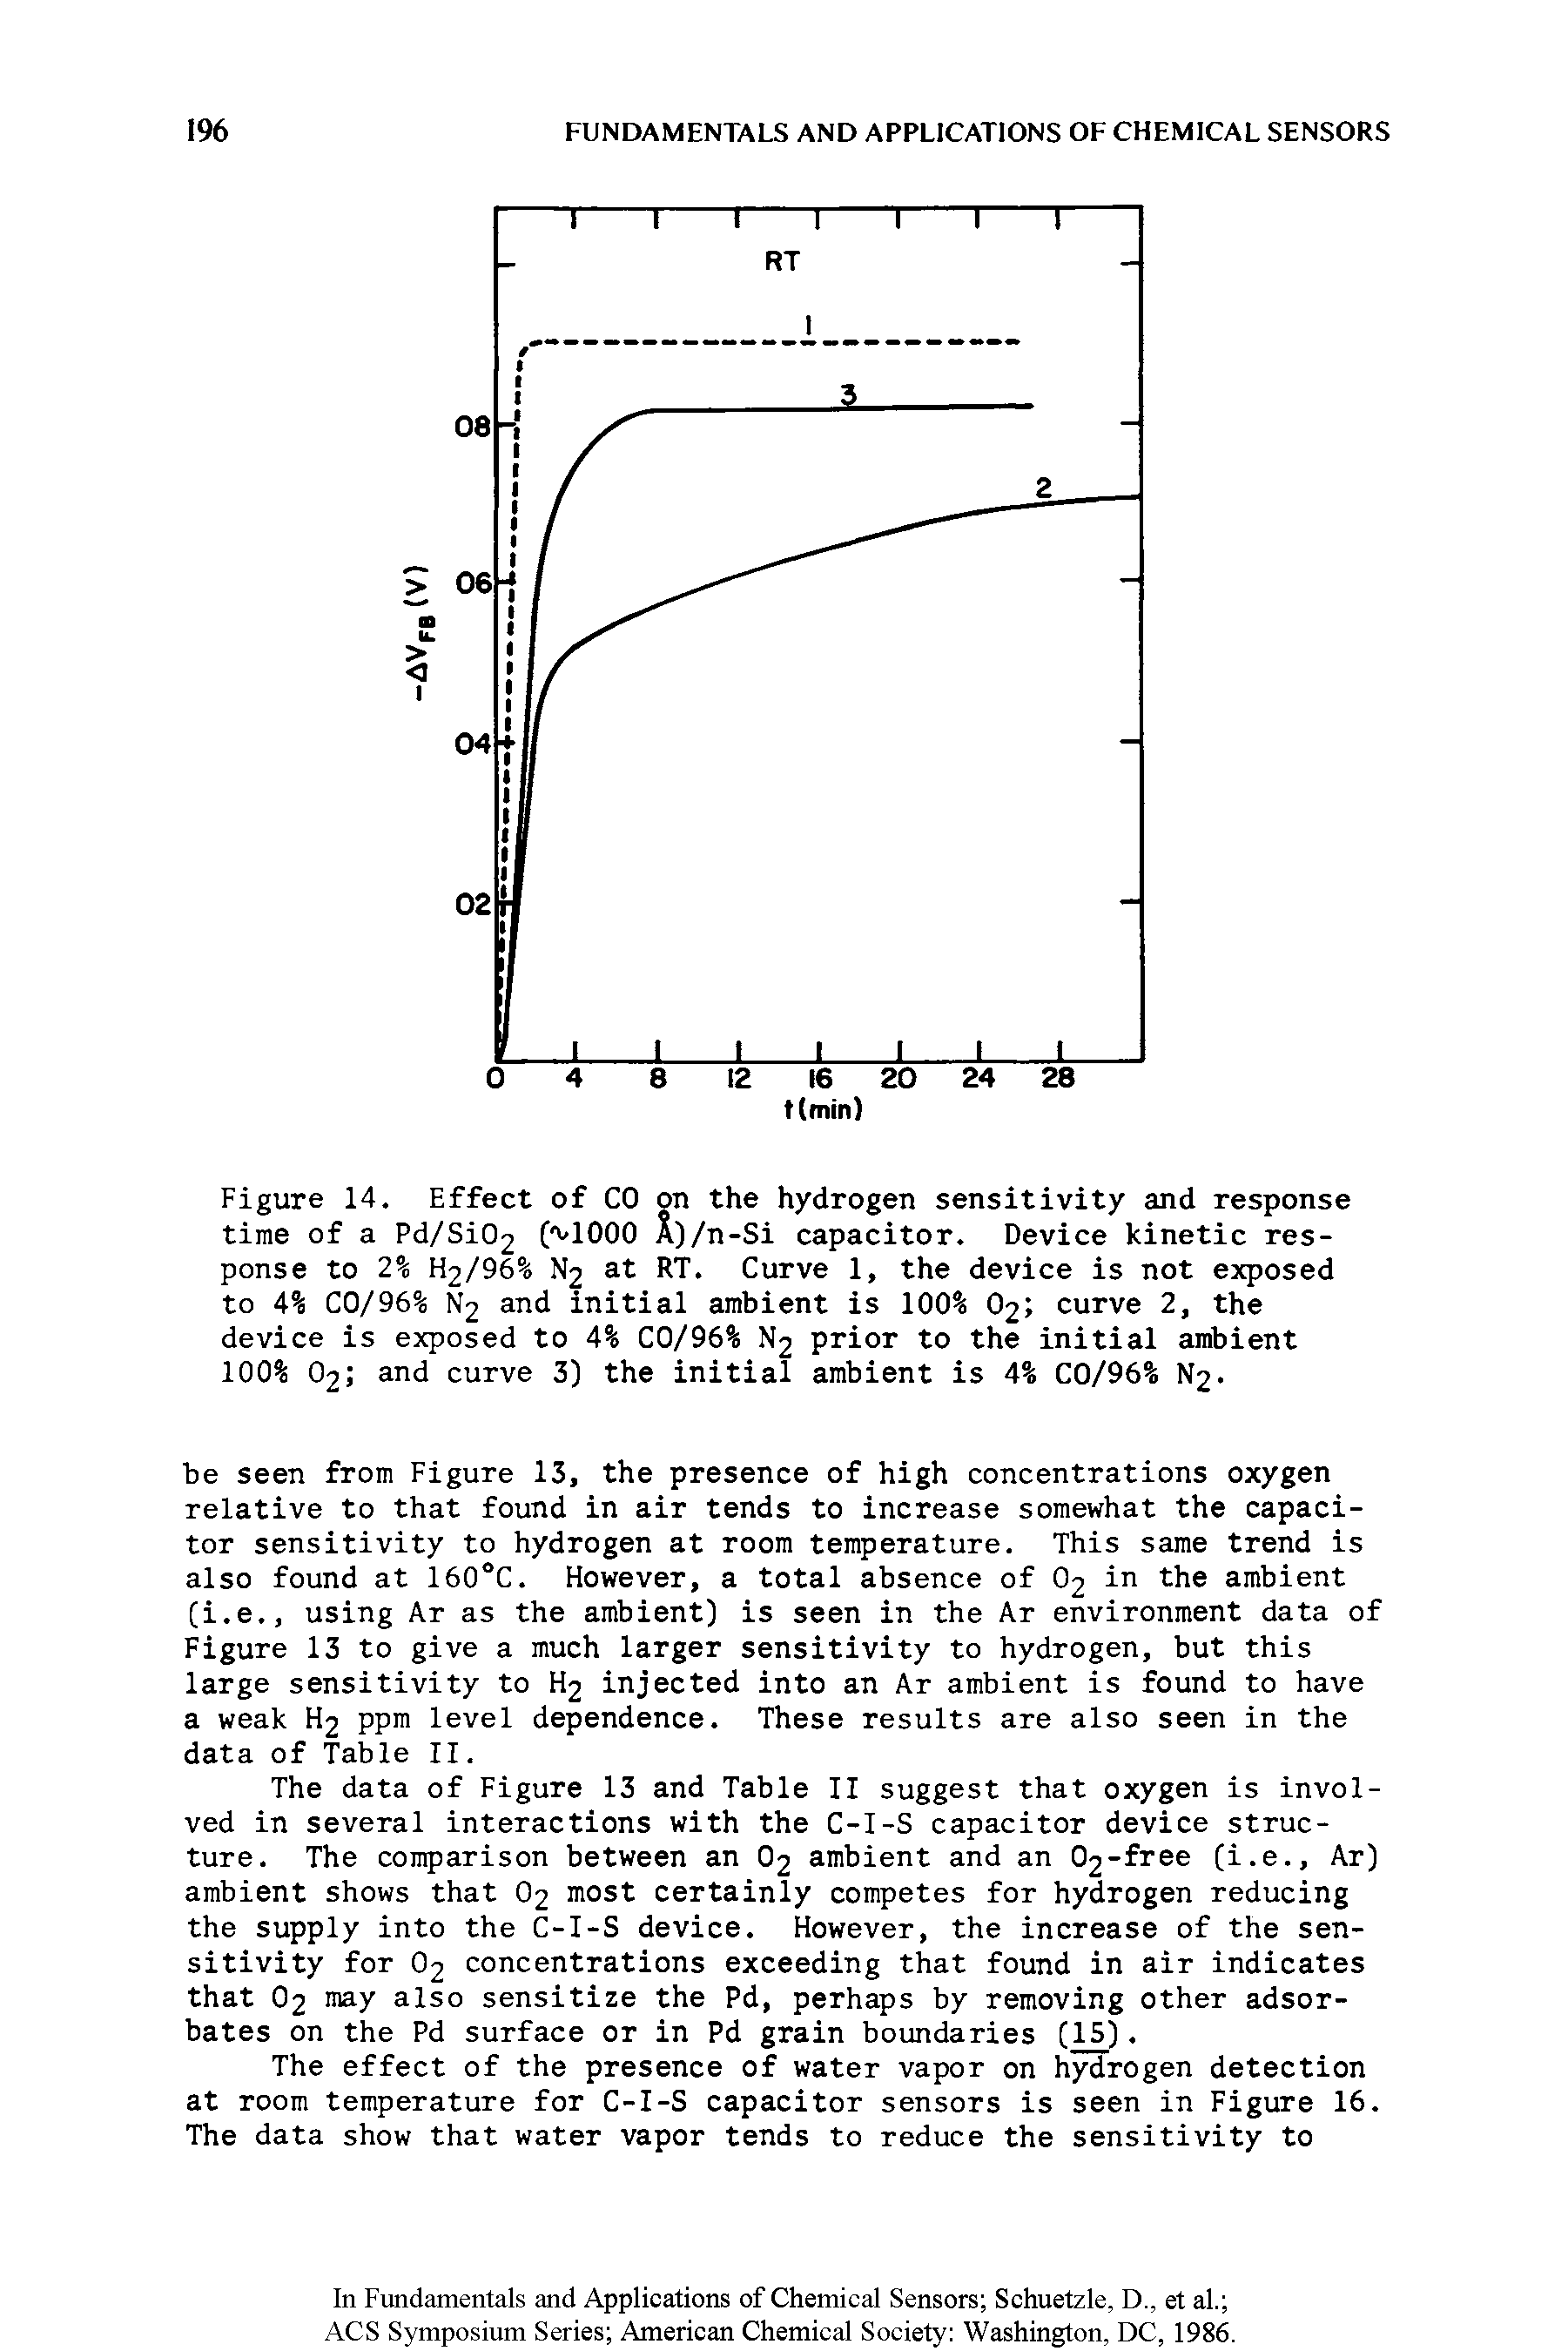 Figure 14. Effect of CO on the hydrogen sensitivity and response time of a Pd/Si02 ( vlOOO X)/n-Si capacitor. Device kinetic response to 2% H2/96% N2 at RT. Curve 1, the device is not exposed to 4% CO/96% N2 and initial ambient is 100% O2 curve 2, the device is exposed to 4% CO/96% N2 prior to the initial ambient 100% O2 and curve 3) the initial ambient is 4% CO/96% l. ...